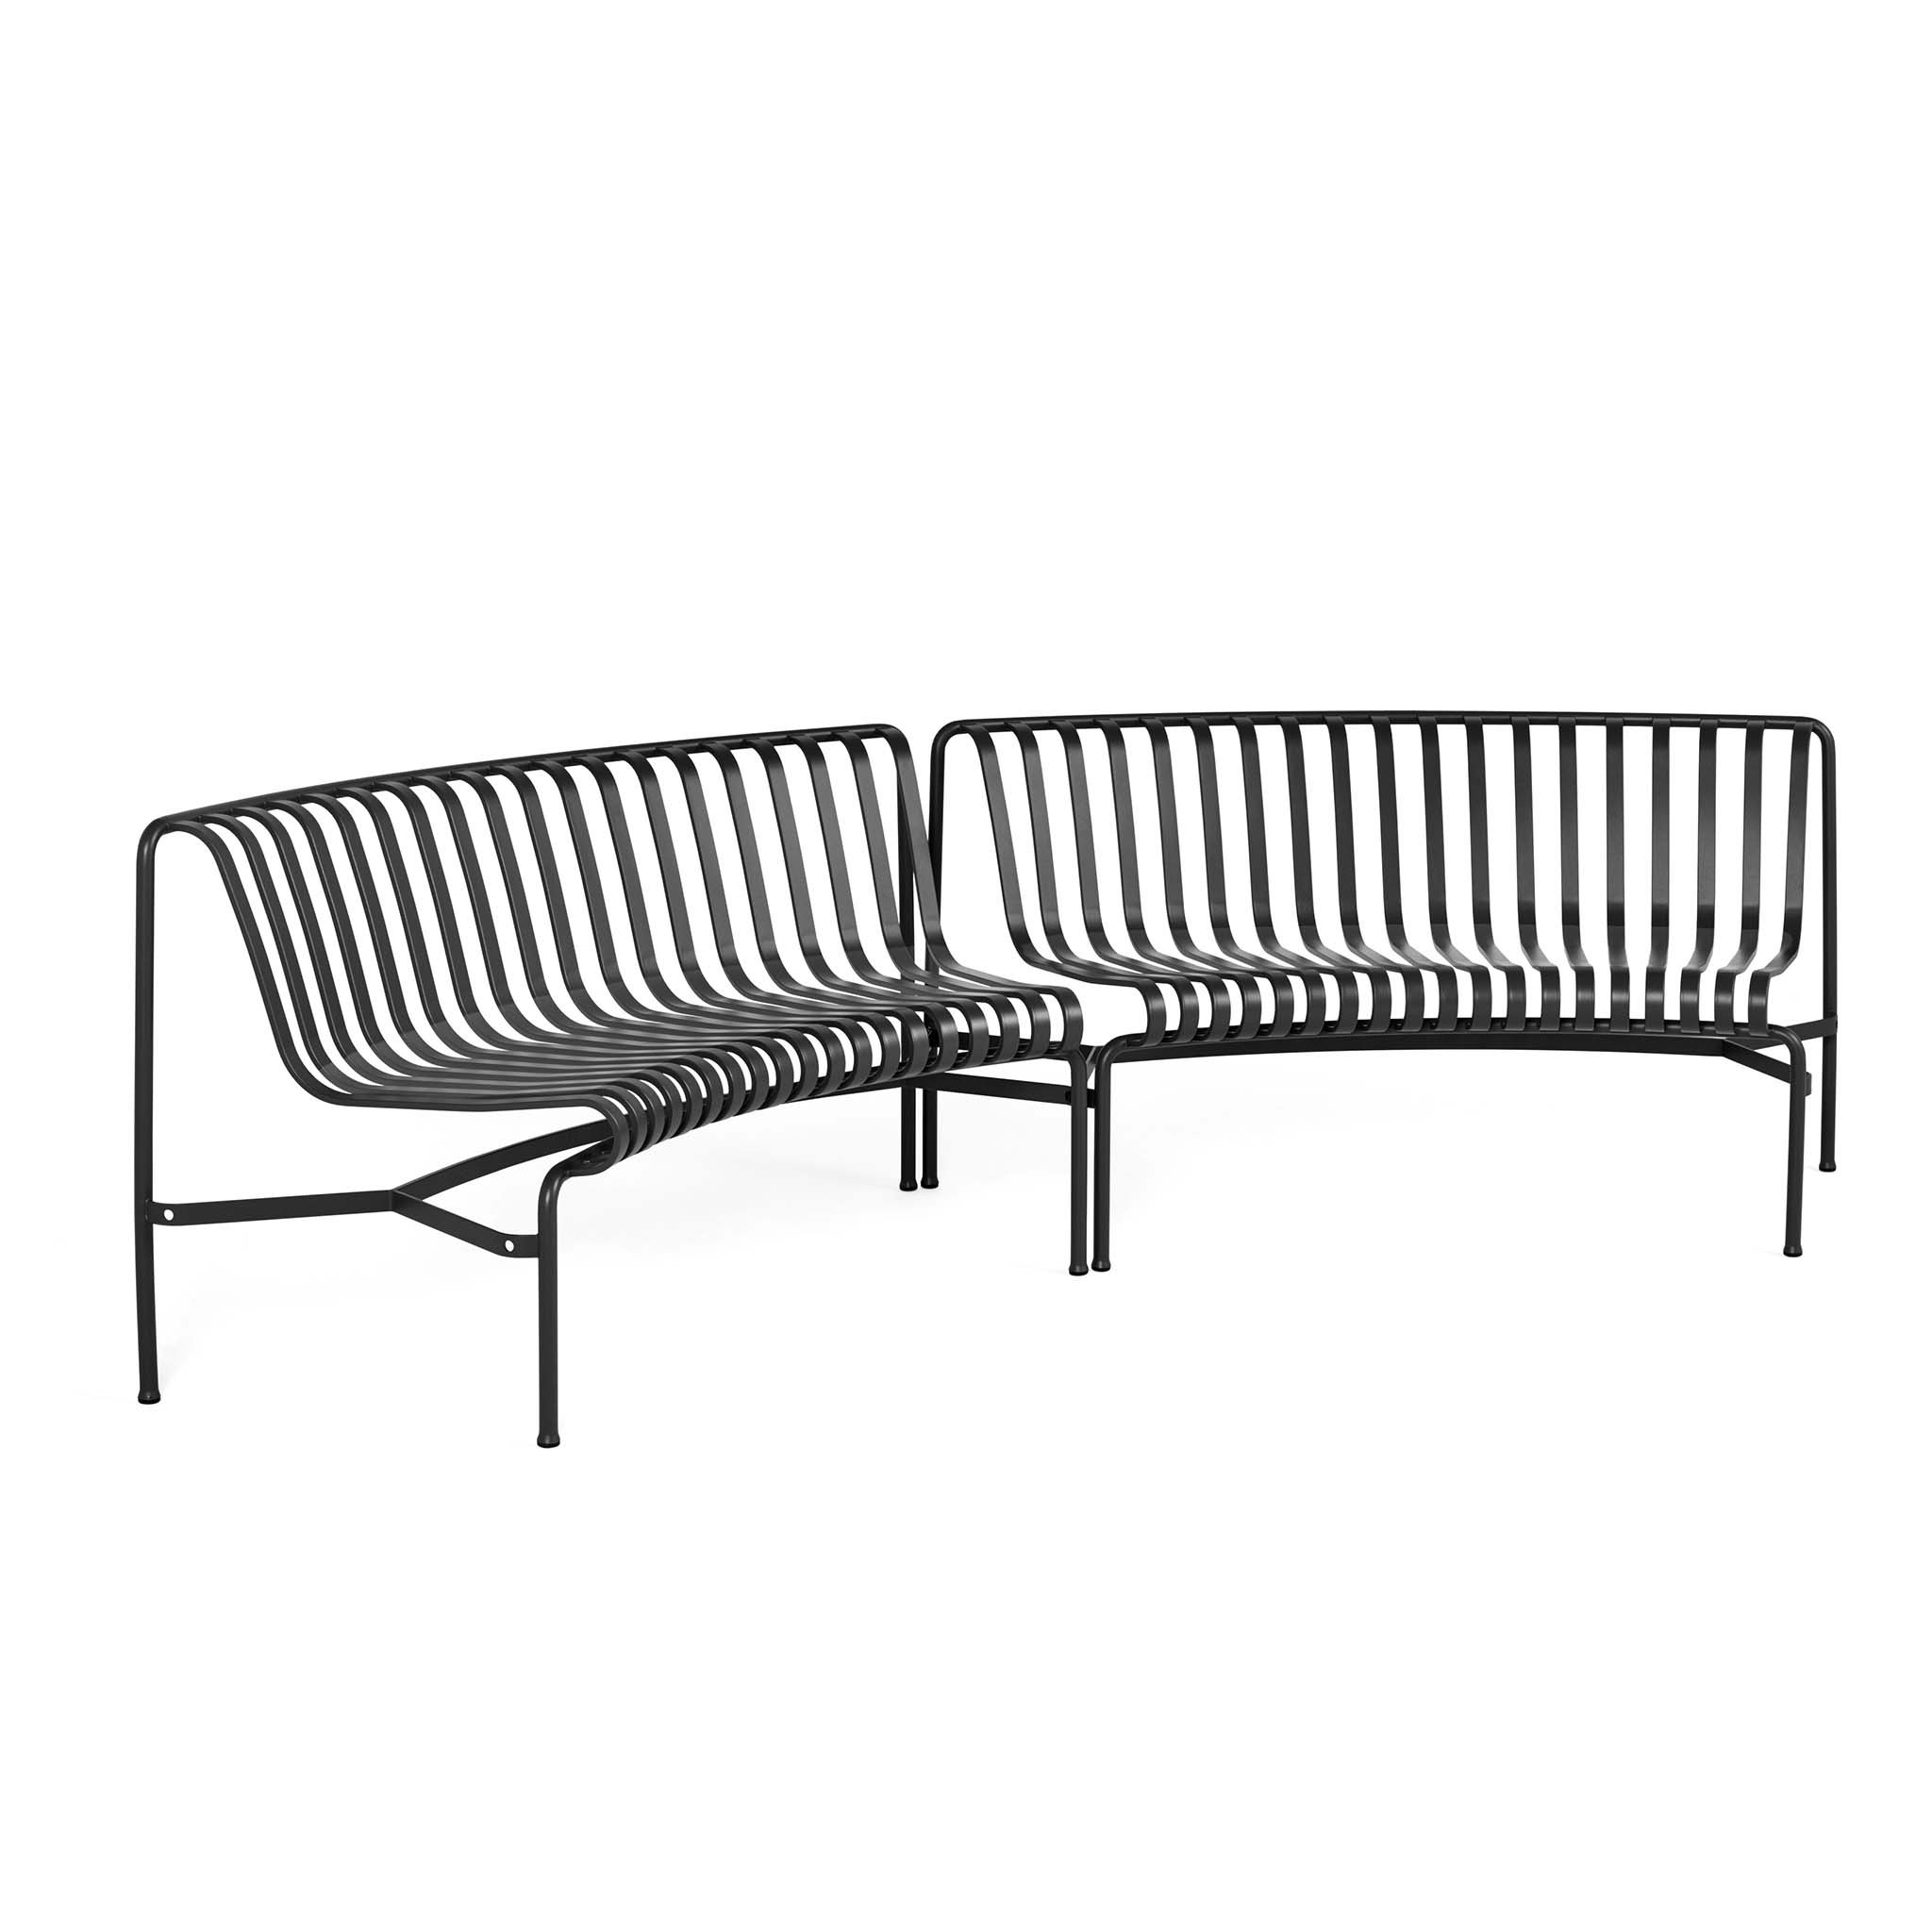 Palissade Park Dining Bench by Ronan & Erwan Bouroullec for Hay